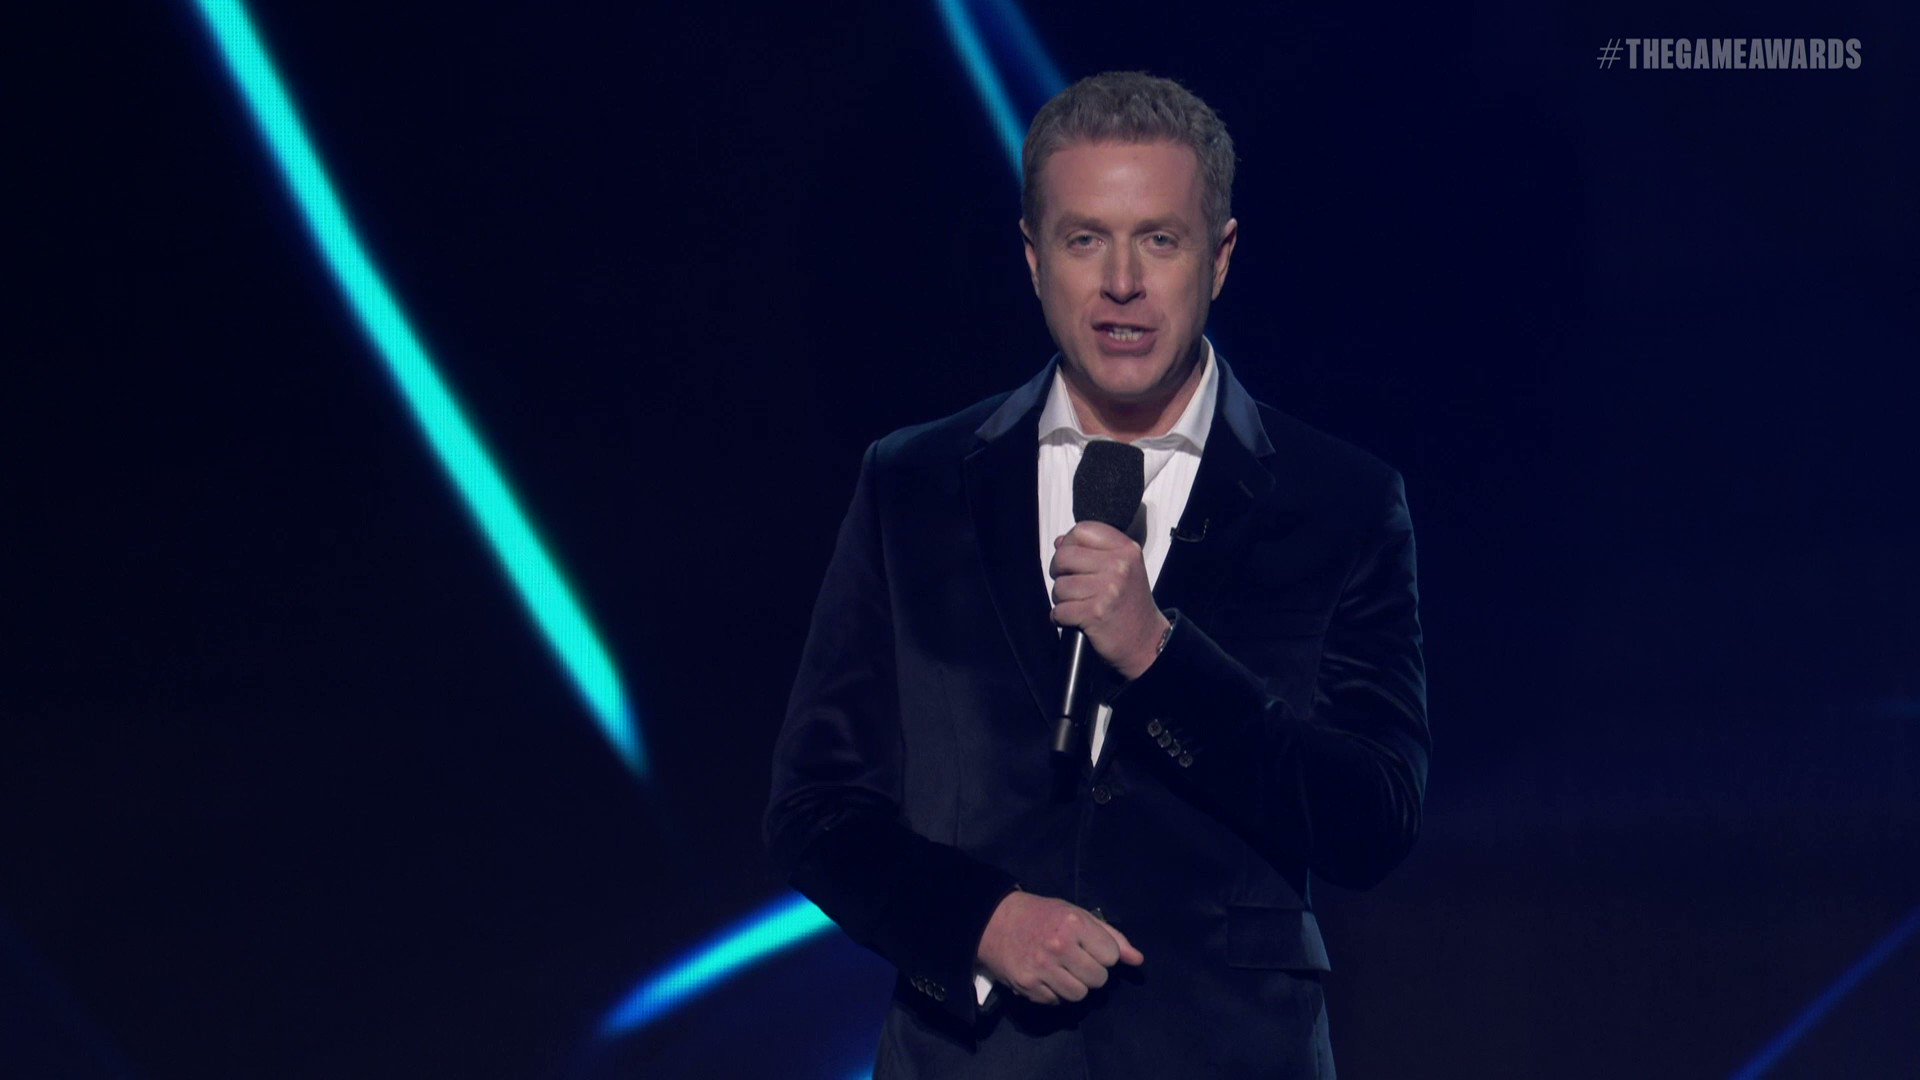 The Game Awards on X: Thank you for watching and supporting